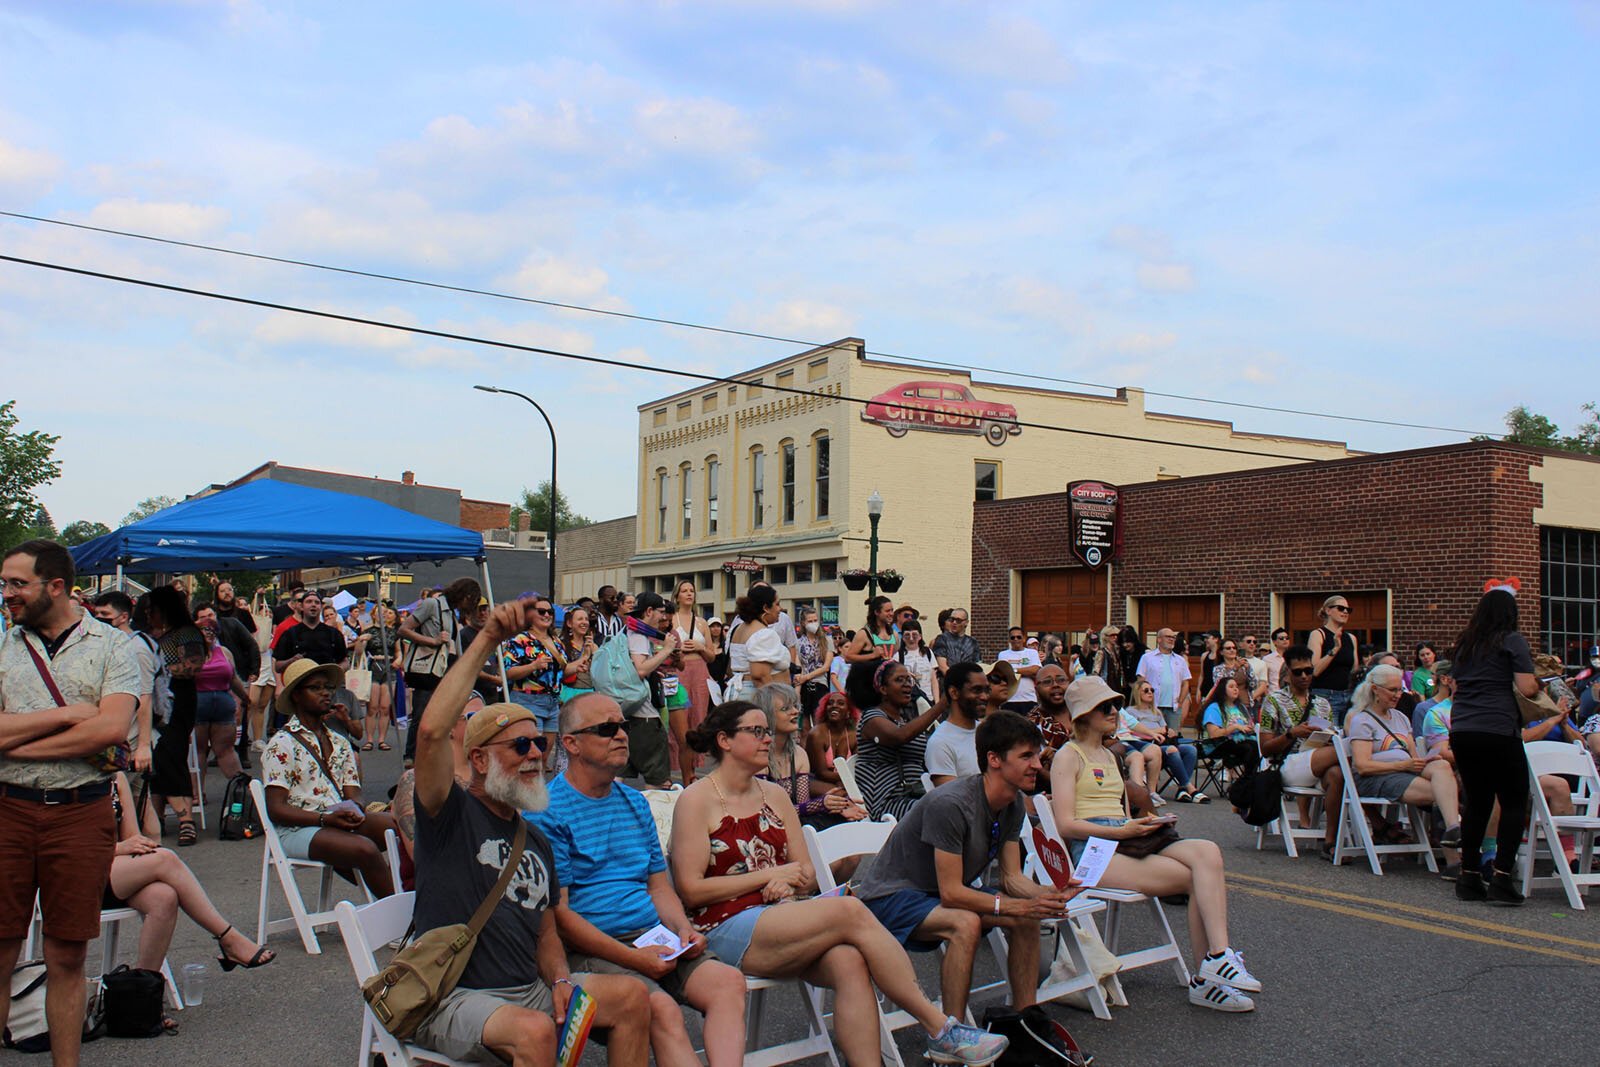 After perusing vendors on Cross Street, a crowd forms at Pride’s Cross Street stage to enjoy live music and entertainment.